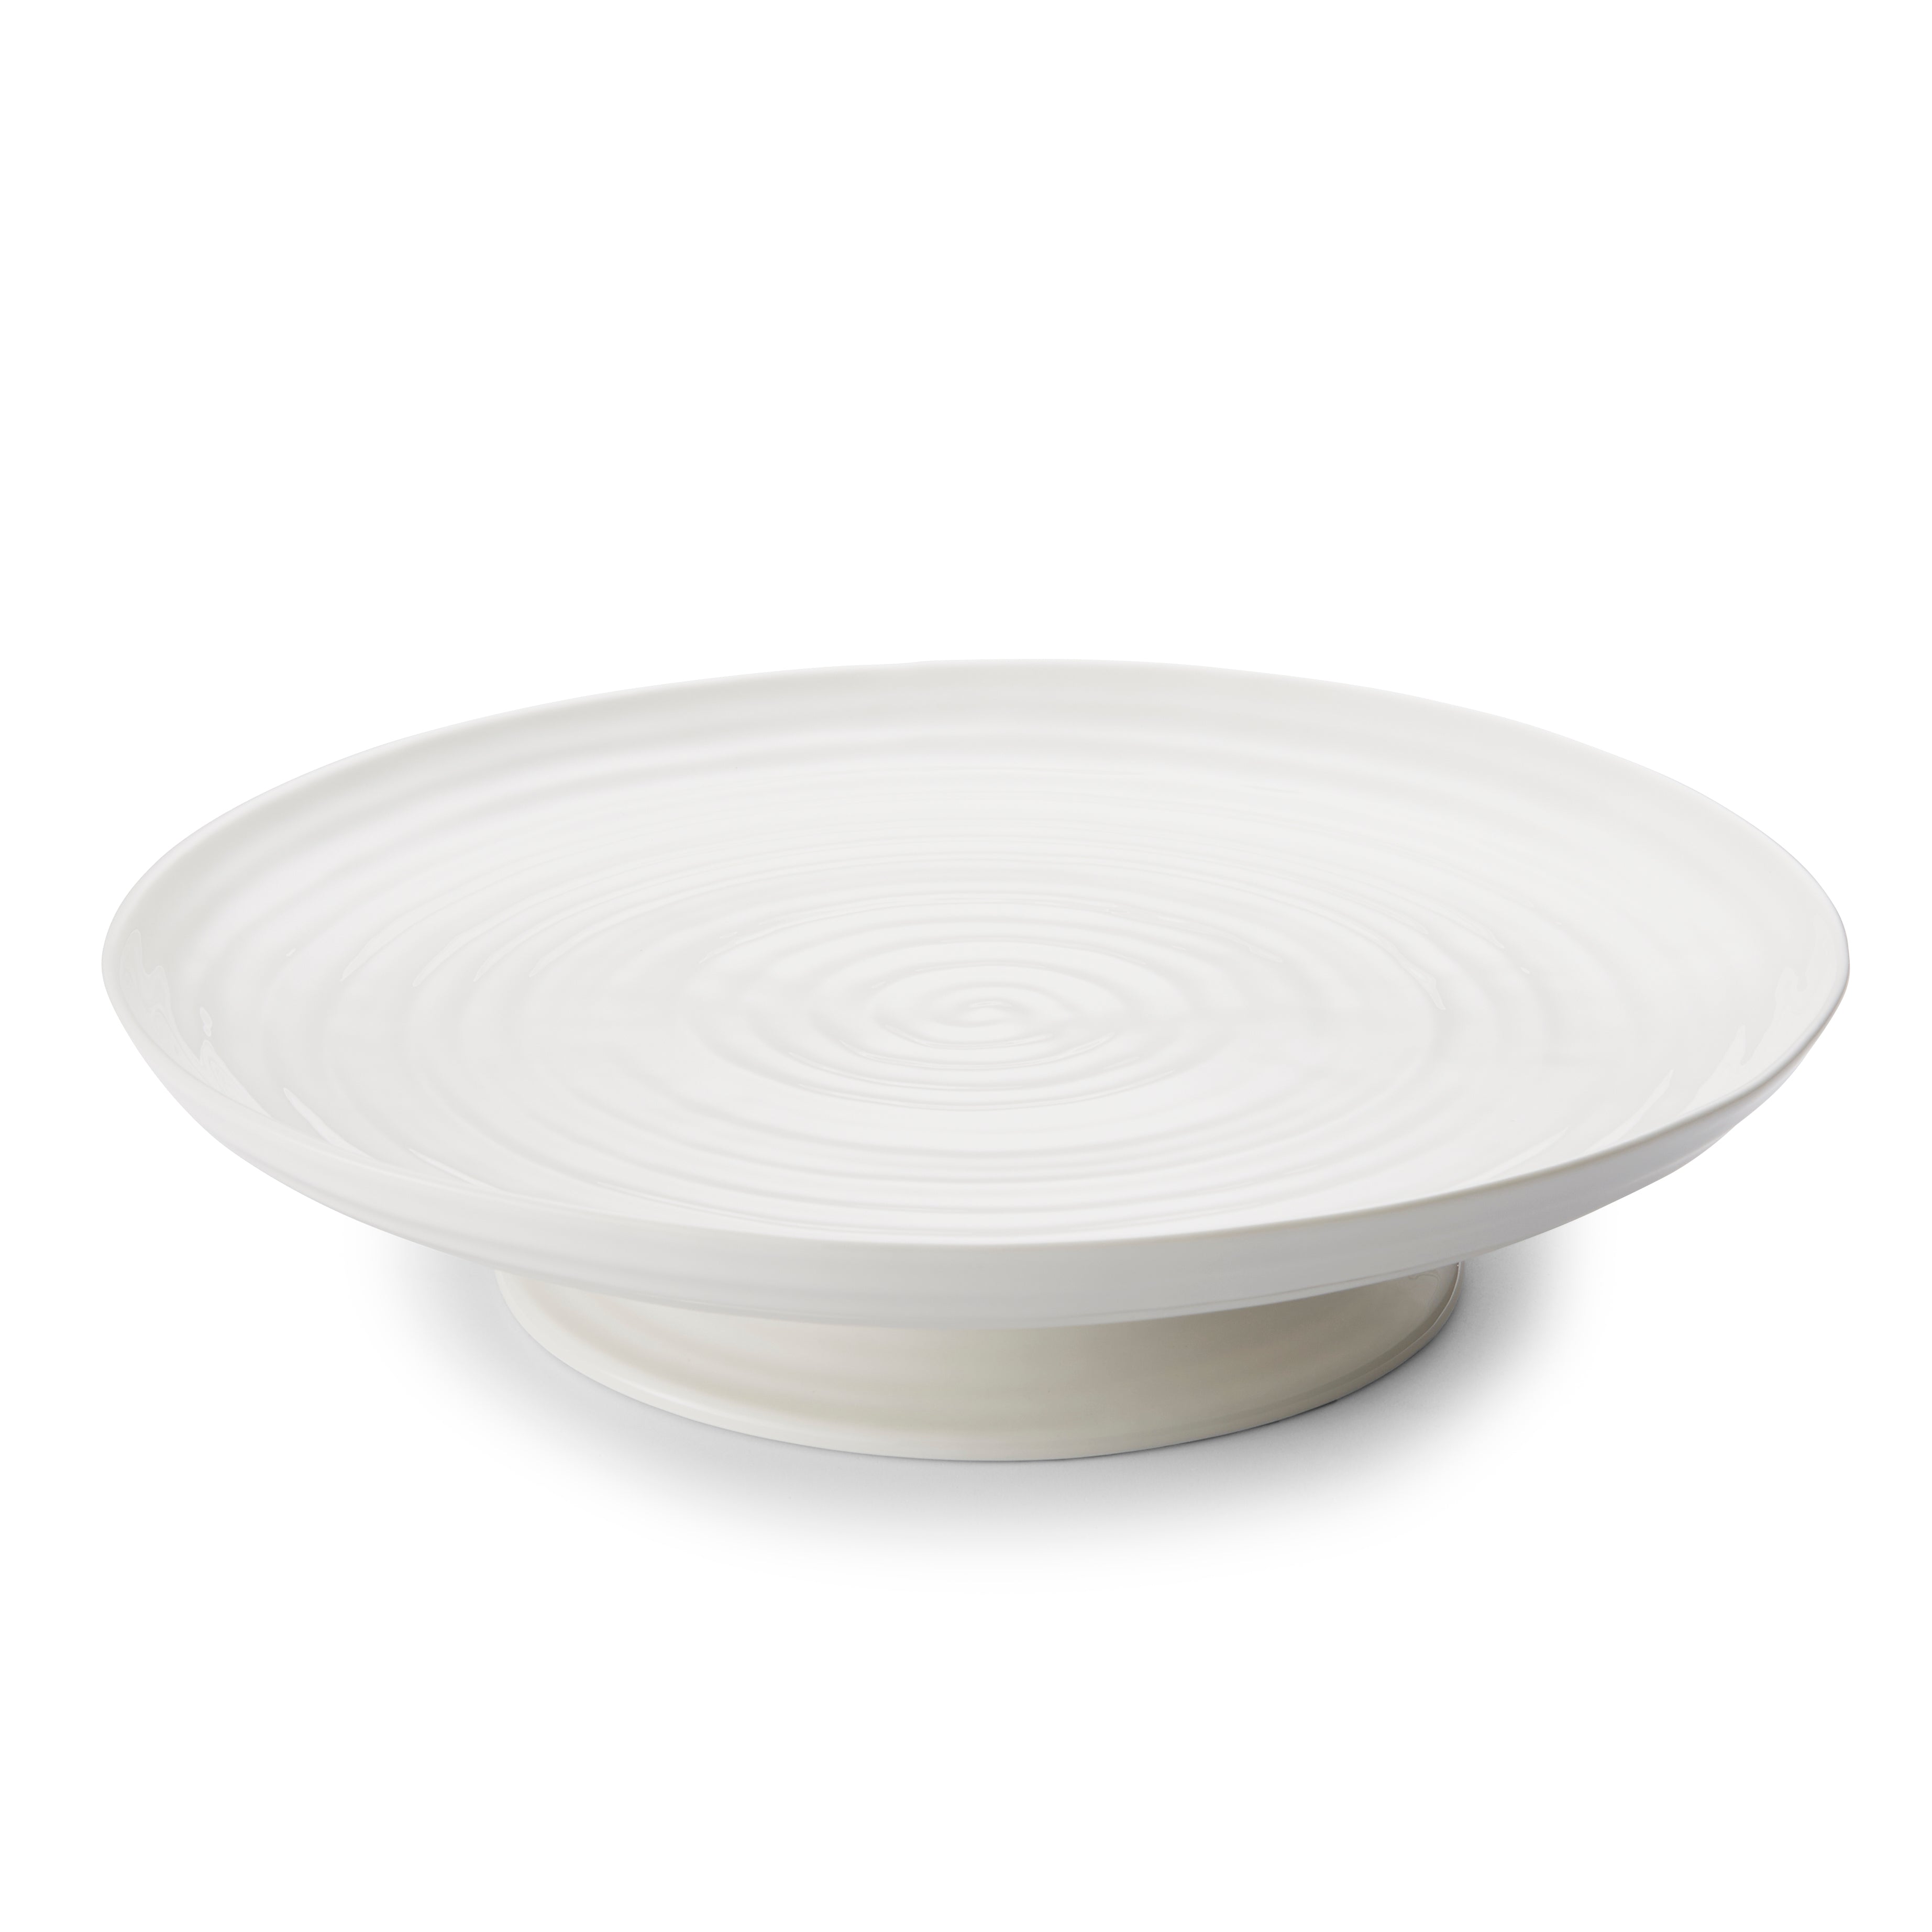 Sophie Conran White Large Footed Cake Plate